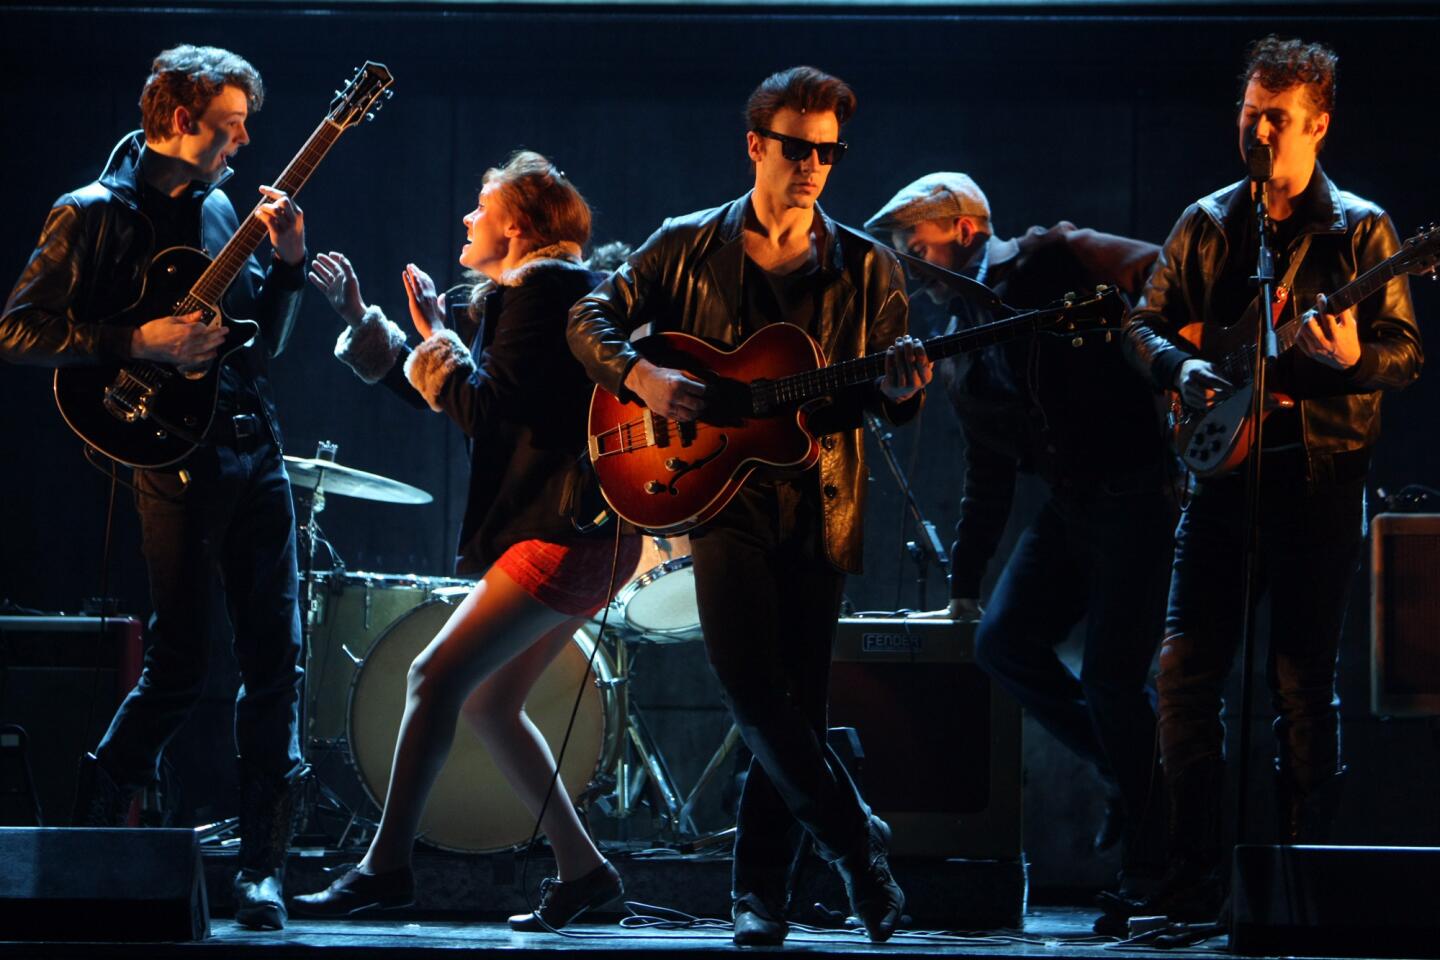 Daniel Westwick (George Harrison), left, Nick Blood (Stuart Sutcliffe) and Andrew Knott (John Lennon). The musical is about the early days of the Beatles and the story of Stuart Sutcliffe, who became known as the Fifth Beatle.